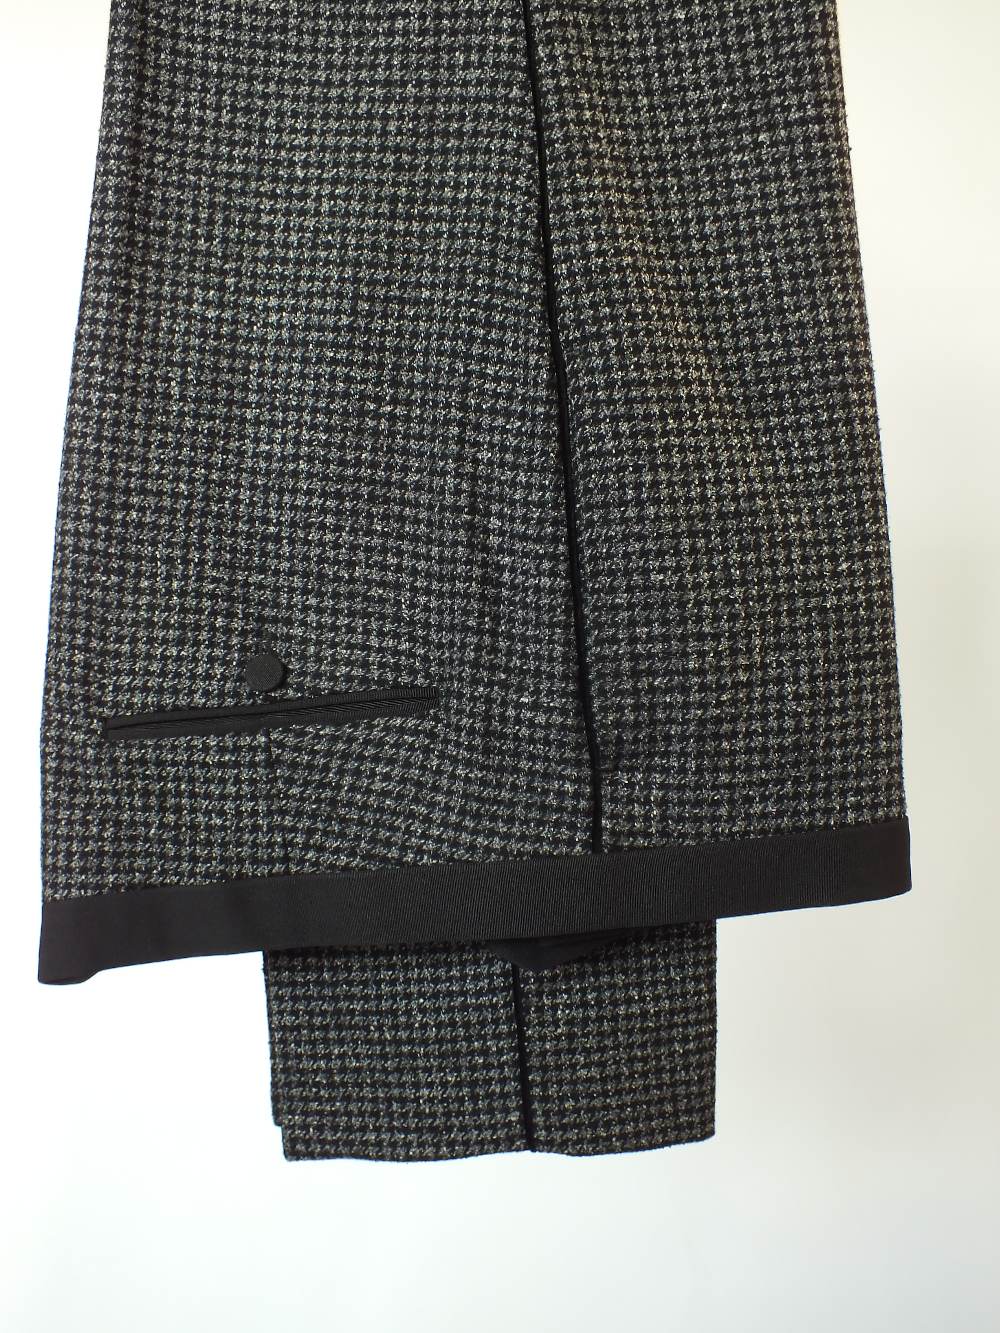 A Gucci dinner suit, dark grey dog tooth check, silk twill detailing to lapel and jacket, single - Image 5 of 6